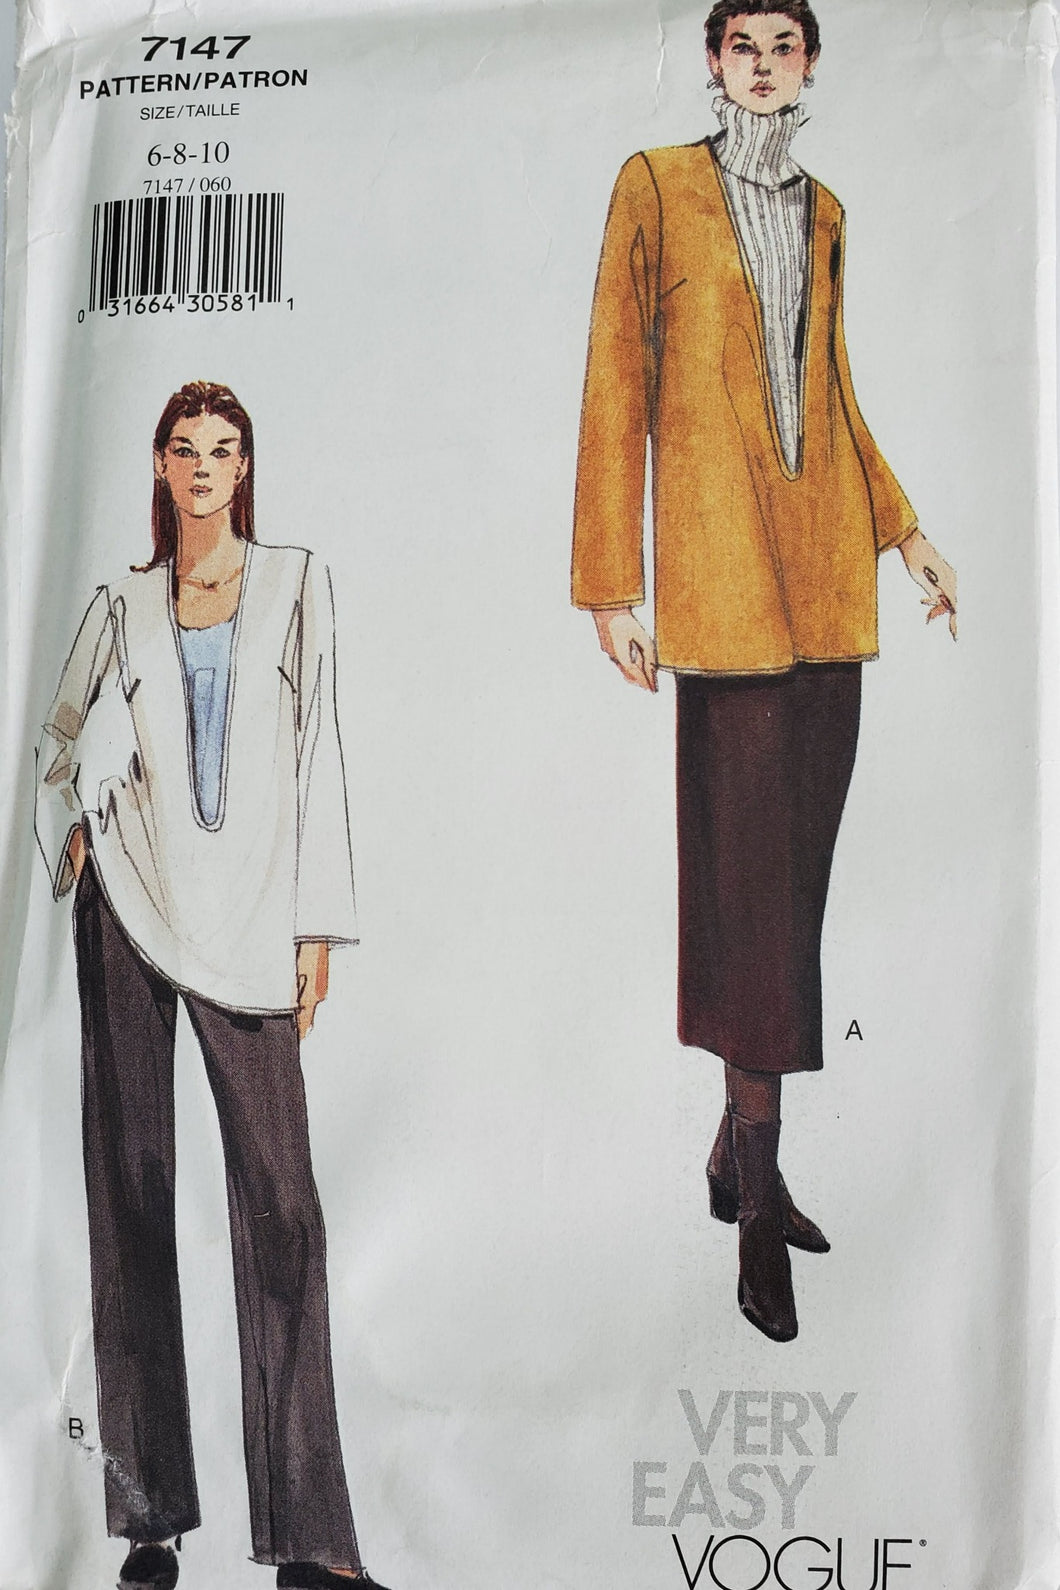 Very Easy Vogue Pattern 7147, UNCUT and UNUSED Tunic, Skirt and Pants, Misses Size 6-8-10, Very Rare